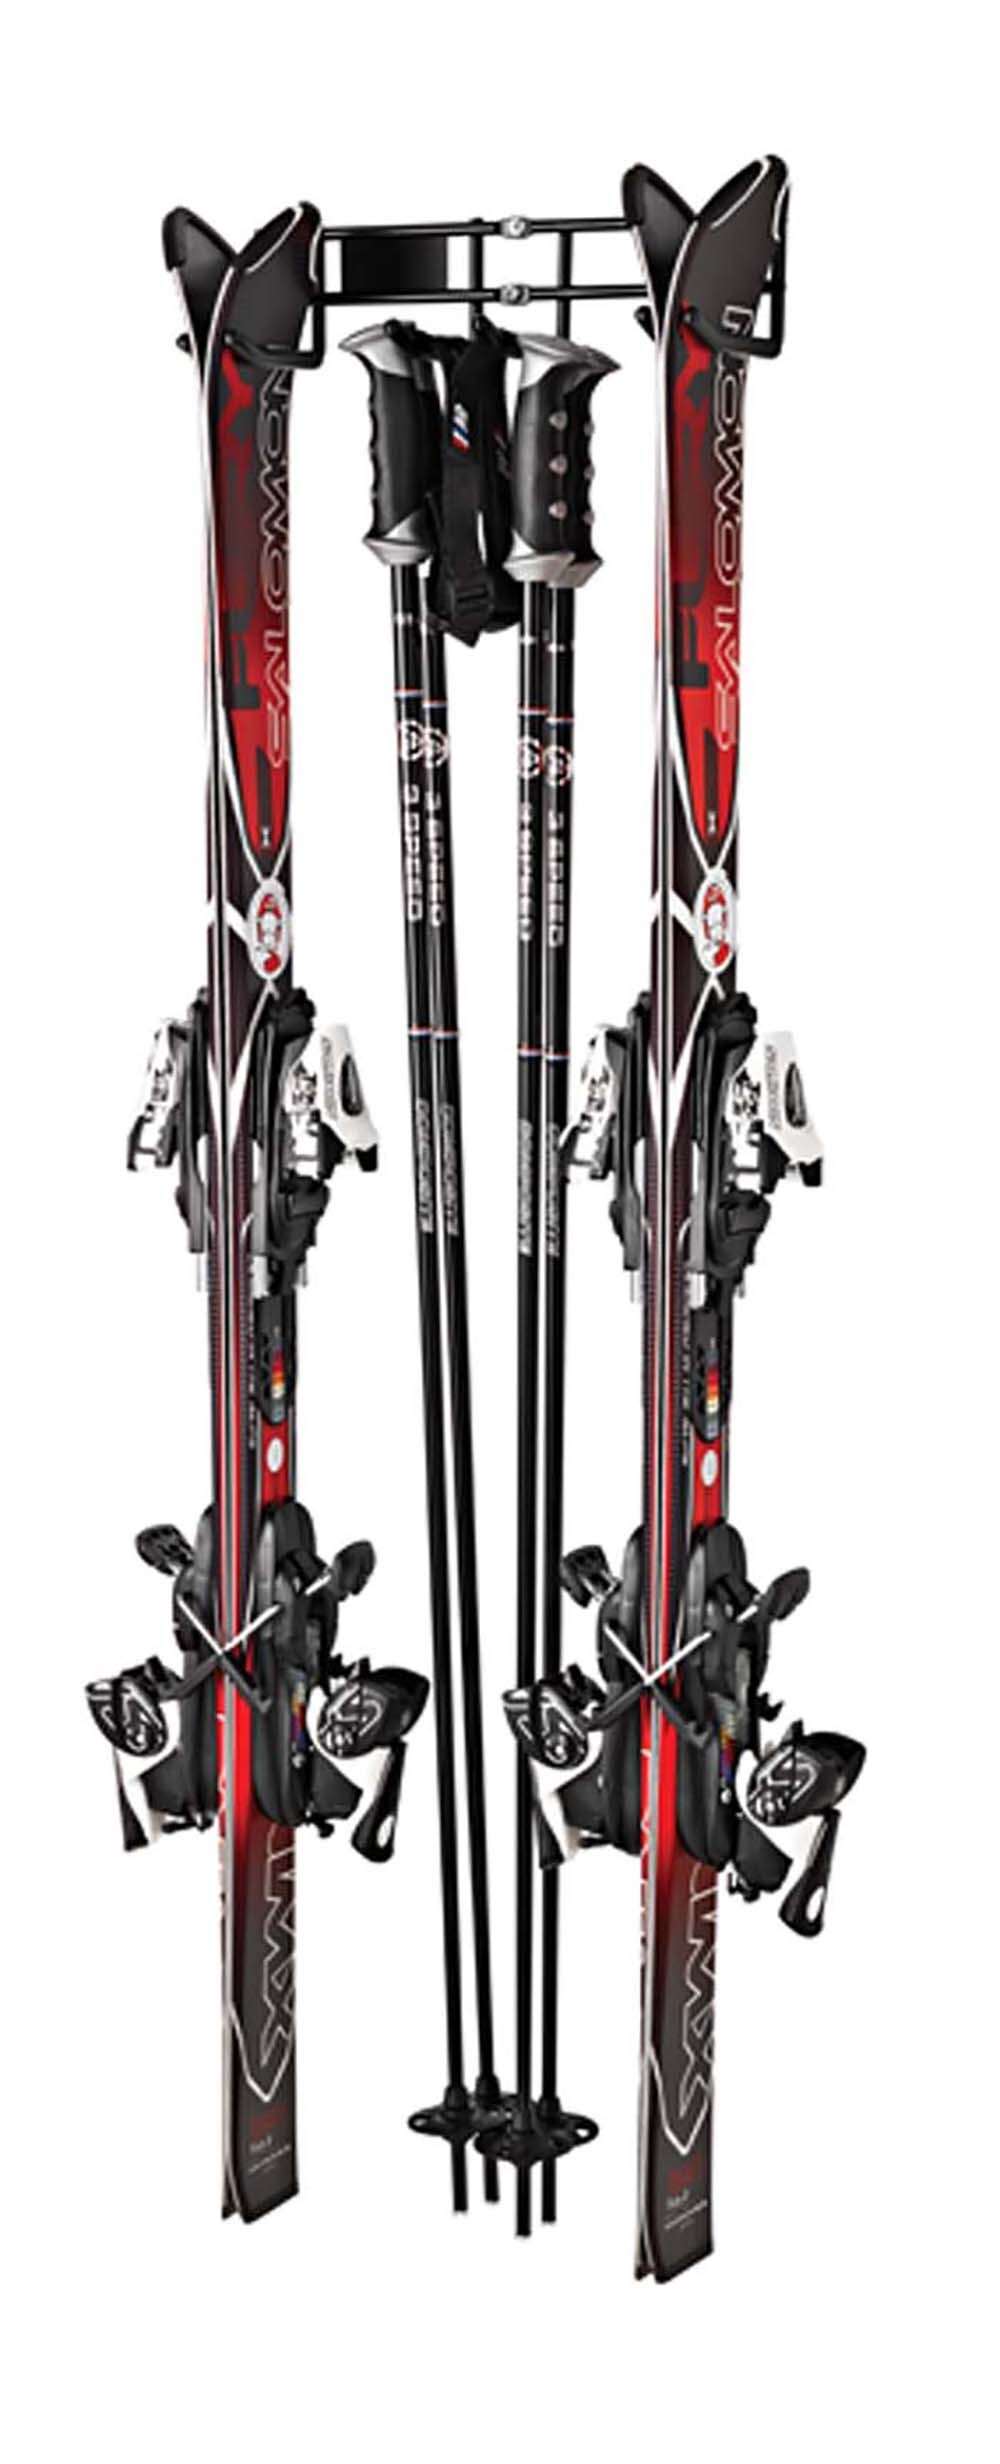 Racor Pro PS-2R Two Pair Ski and Pole Rack 